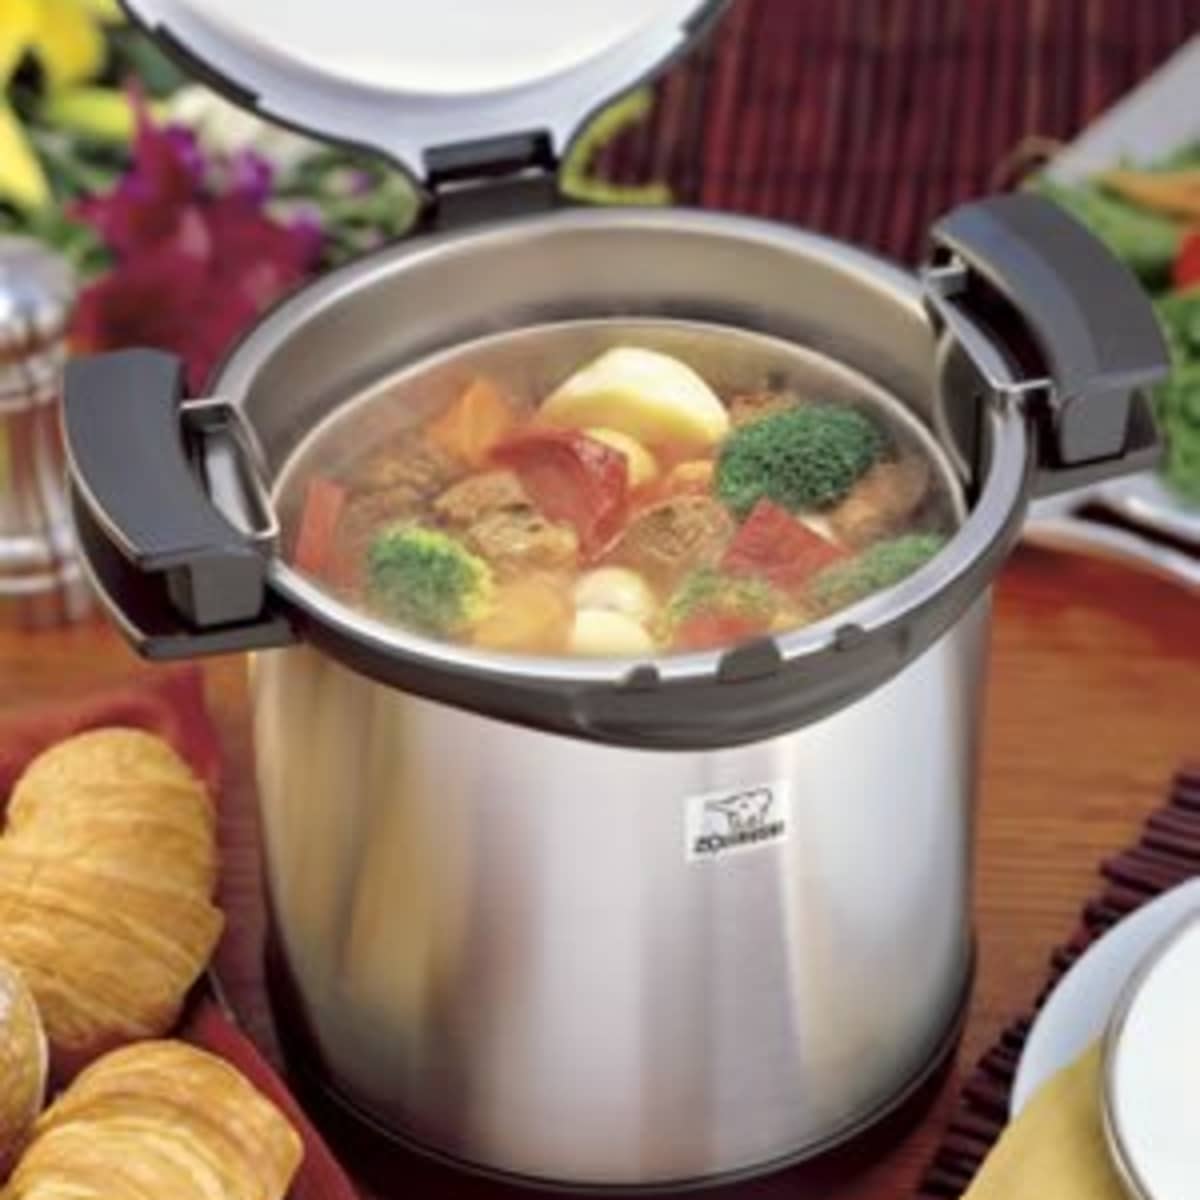 Thermal Cooker: What is it and how to use it - Fine Dining Lovers